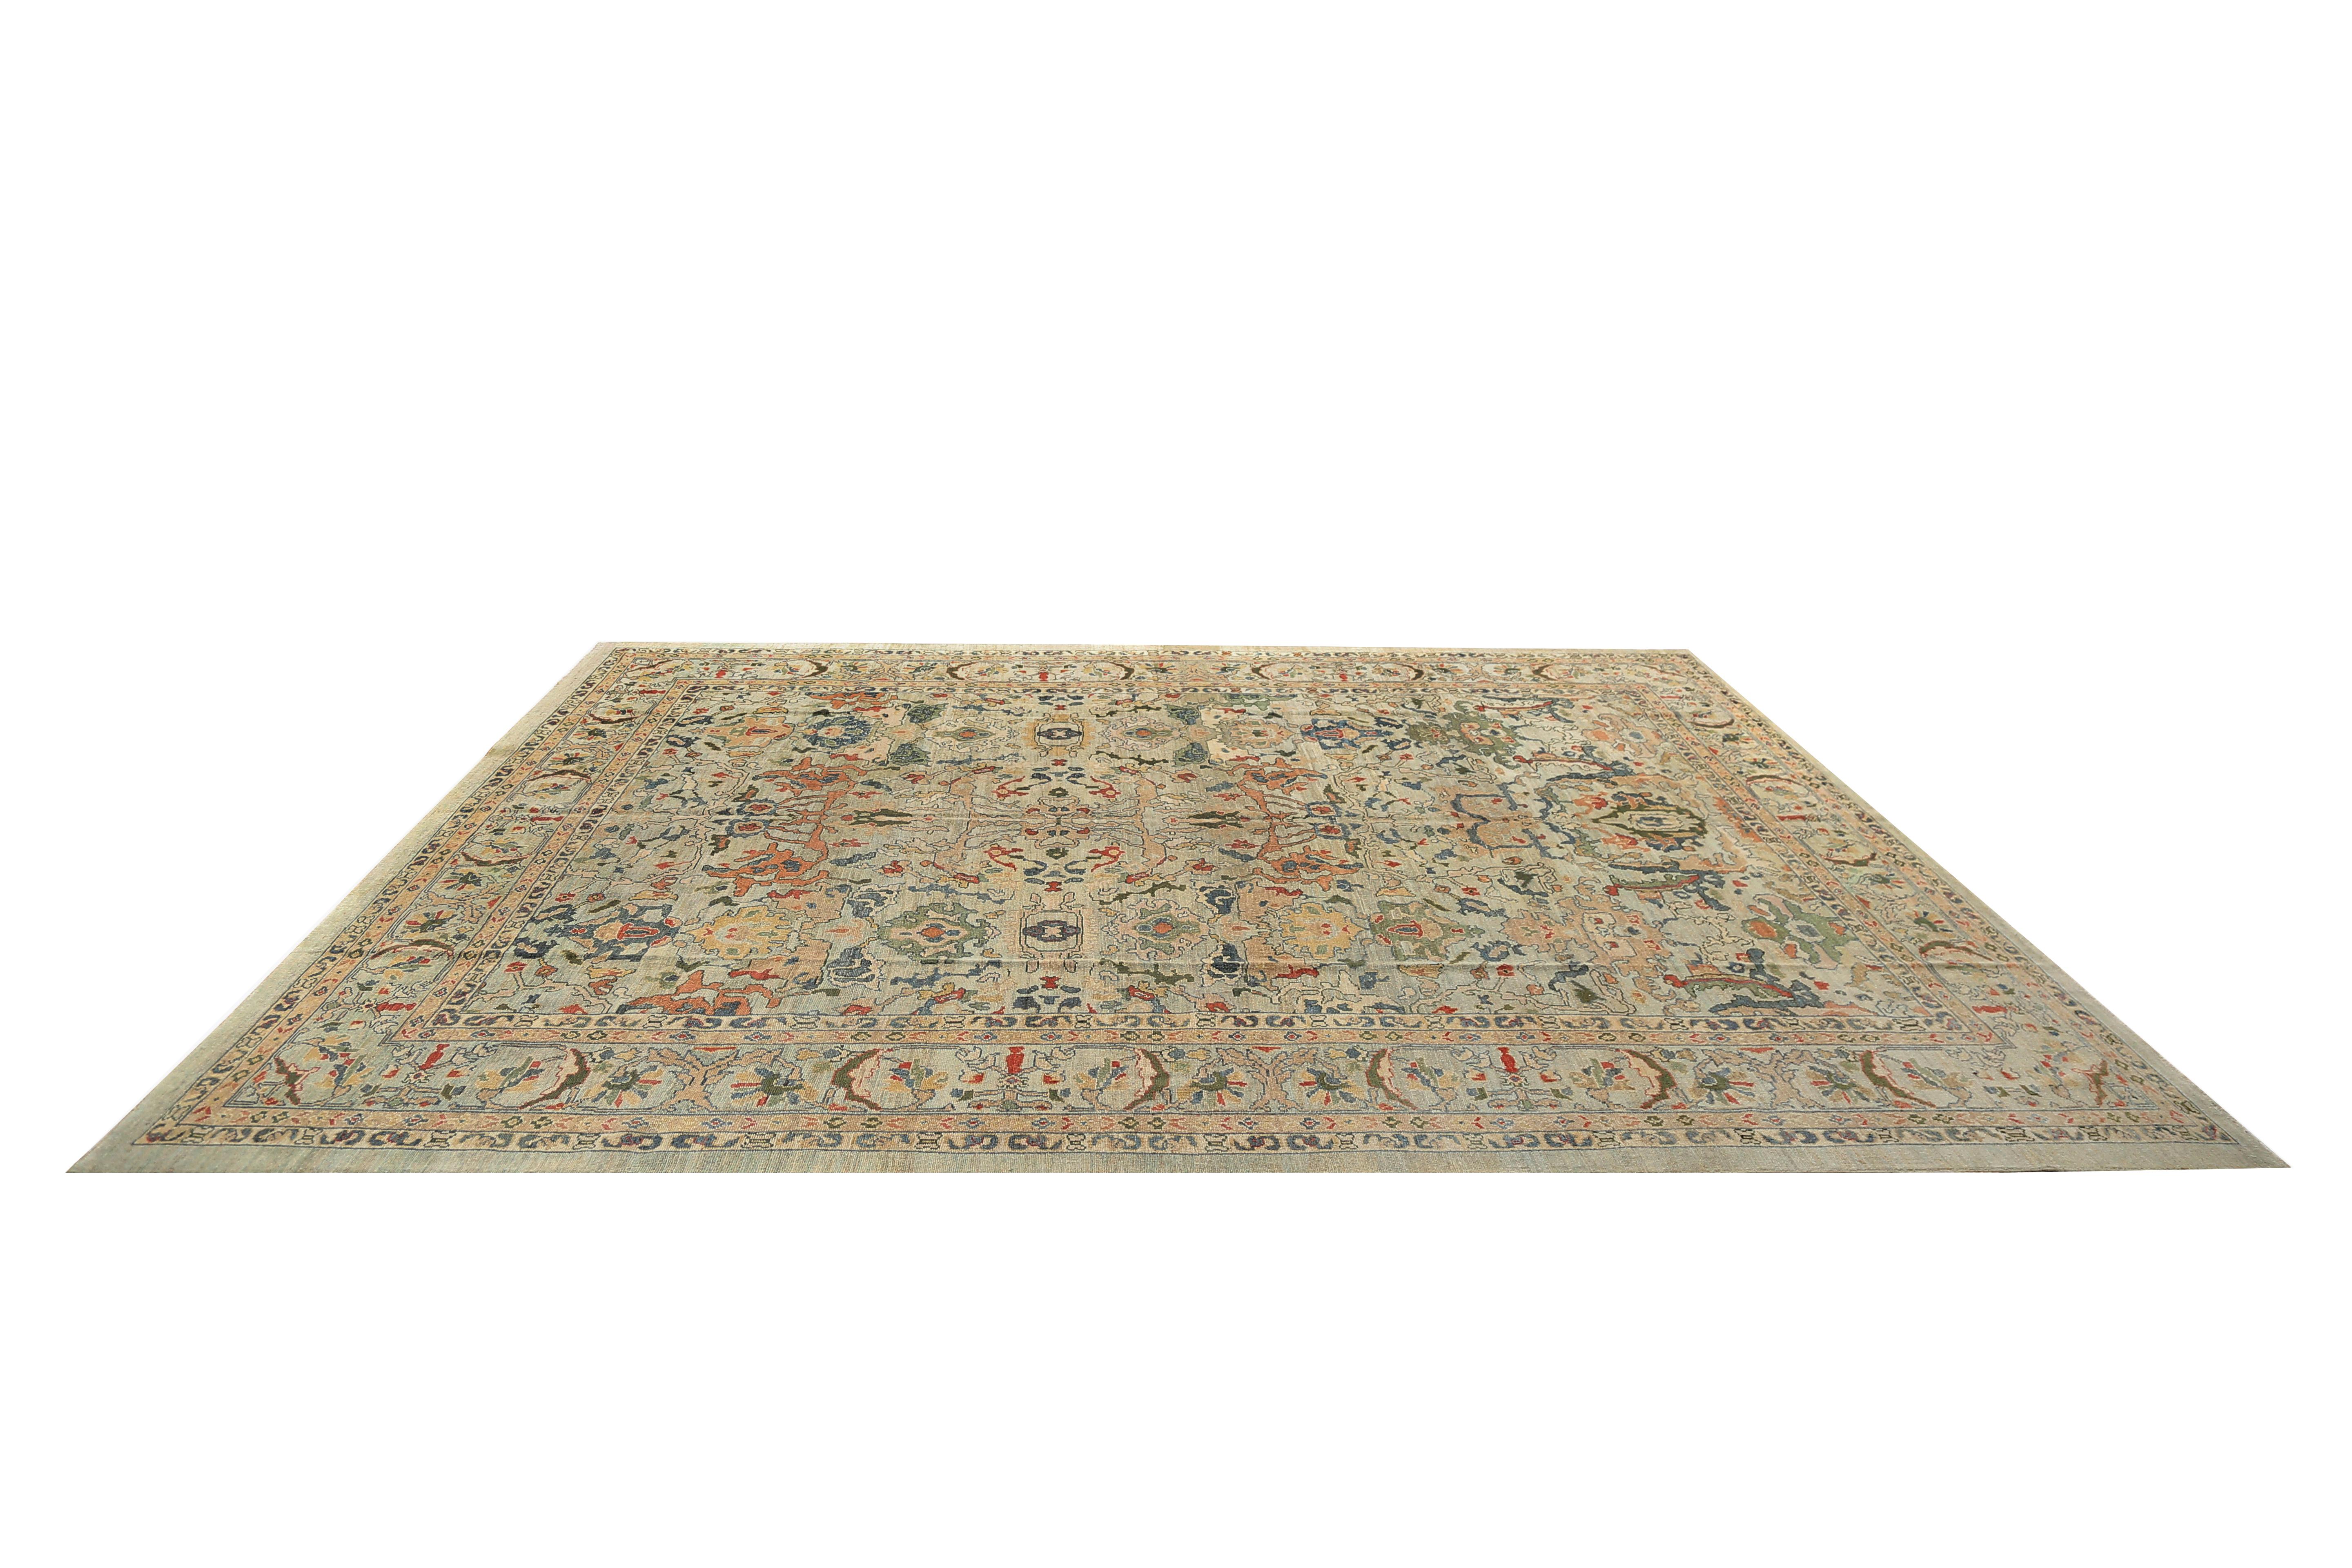 Introducing our stunning handmade Turkish Sultanabad rug, perfect for adding a touch of elegance and vibrancy to any space. With a beautiful beige background and blended border design, this rug is a true work of art. The colorful and vibrant design